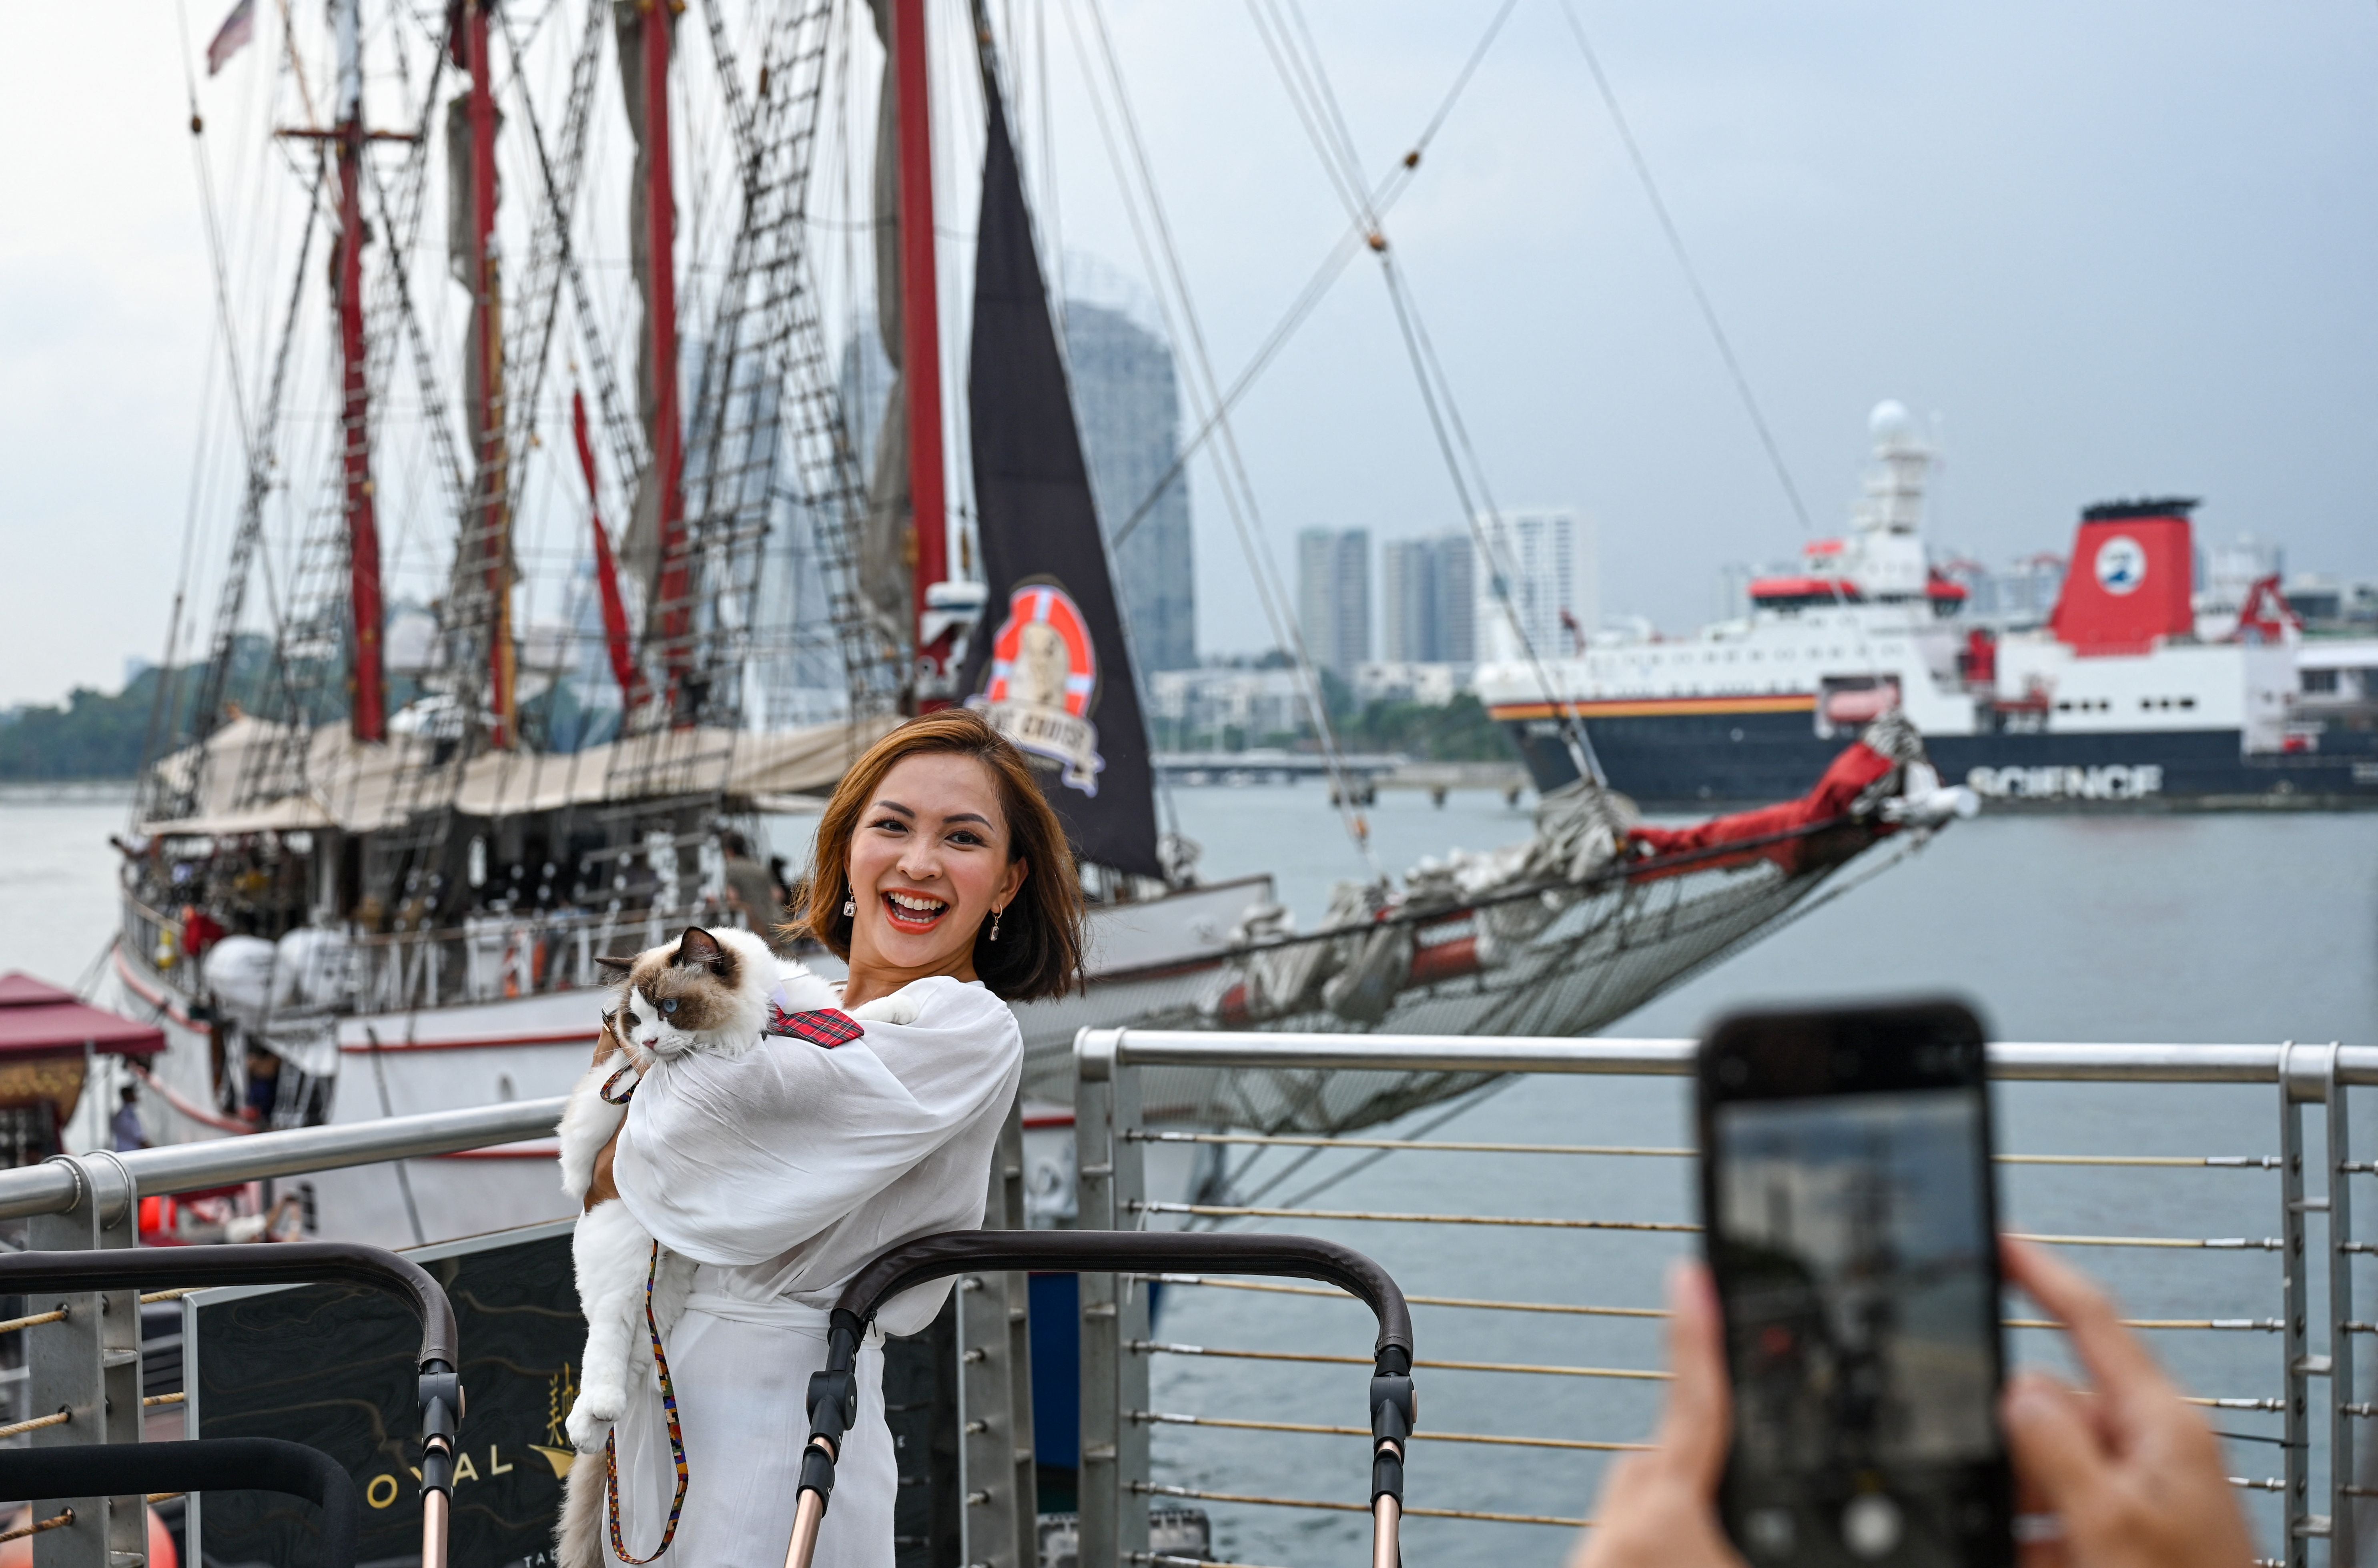 The worlds first cat cruise will depart from Sentosa, Singapore